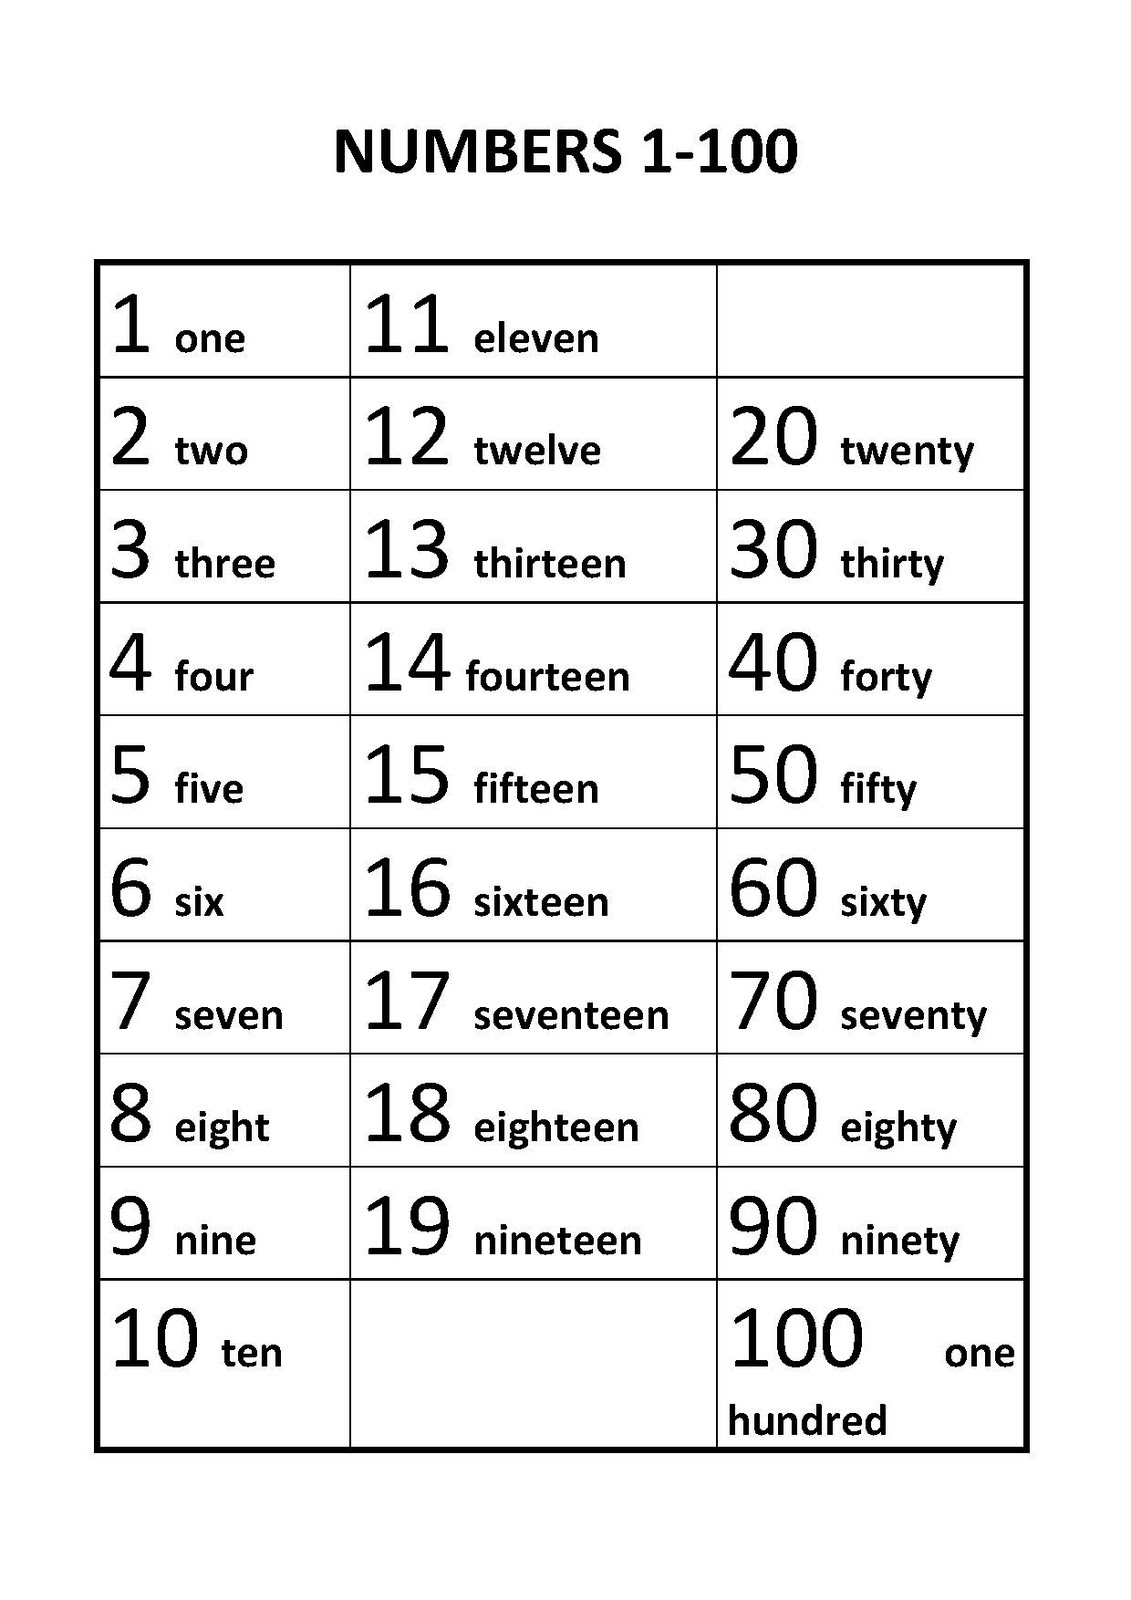 8-best-images-of-spelling-number-words-1-100-worksheets-english-numbers-1-100-spell-numbers-1